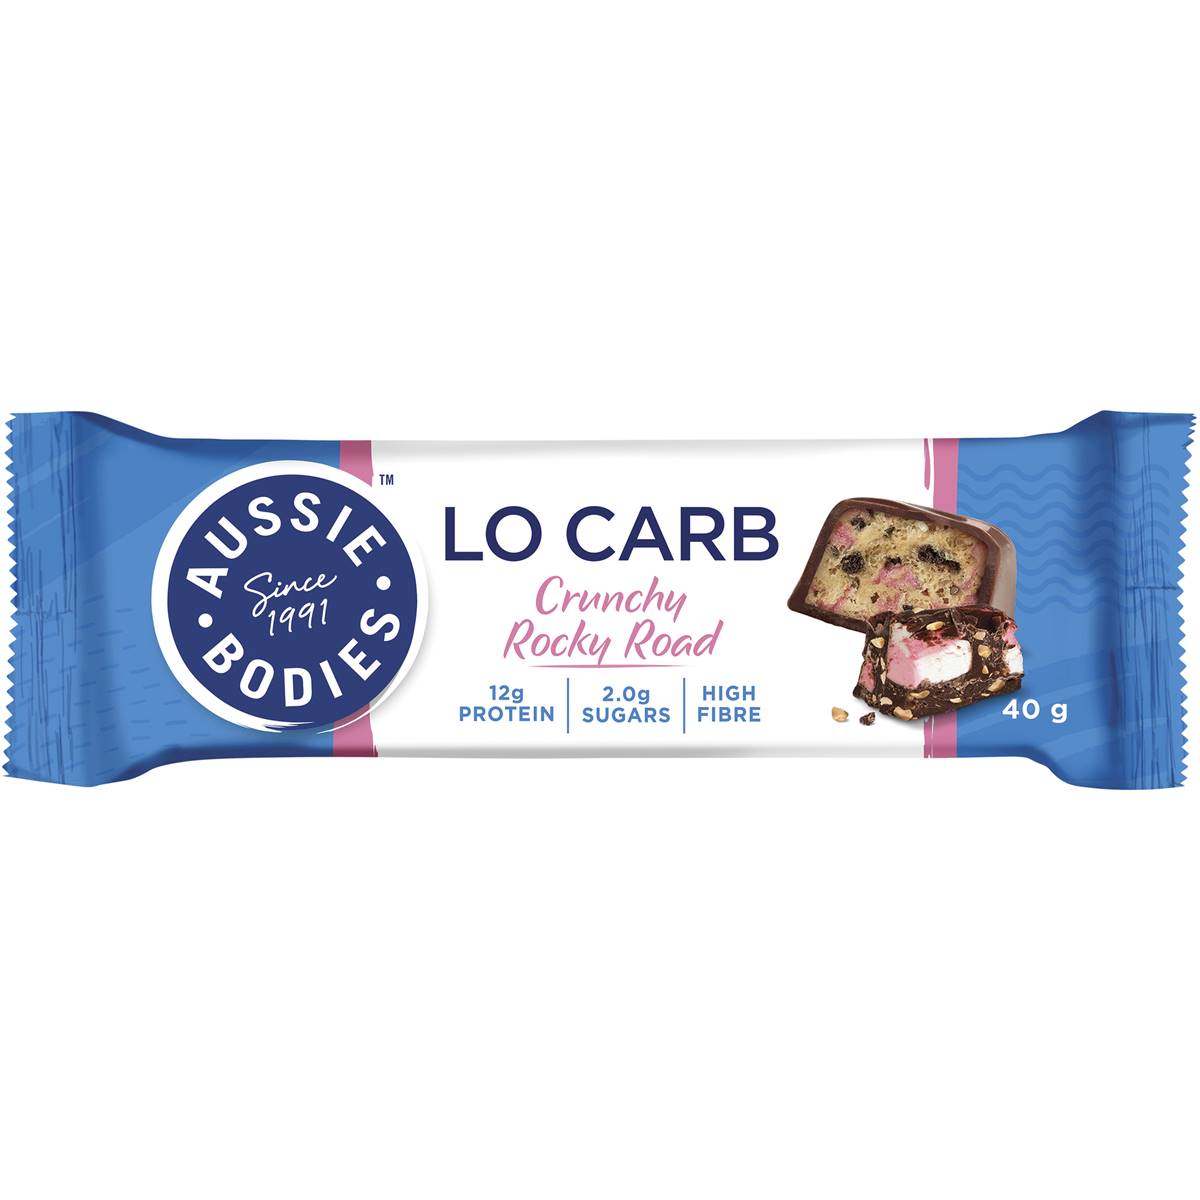 Calories in Aussie Bodies Lo Carb Protein Bar Crunchy Rocky Road